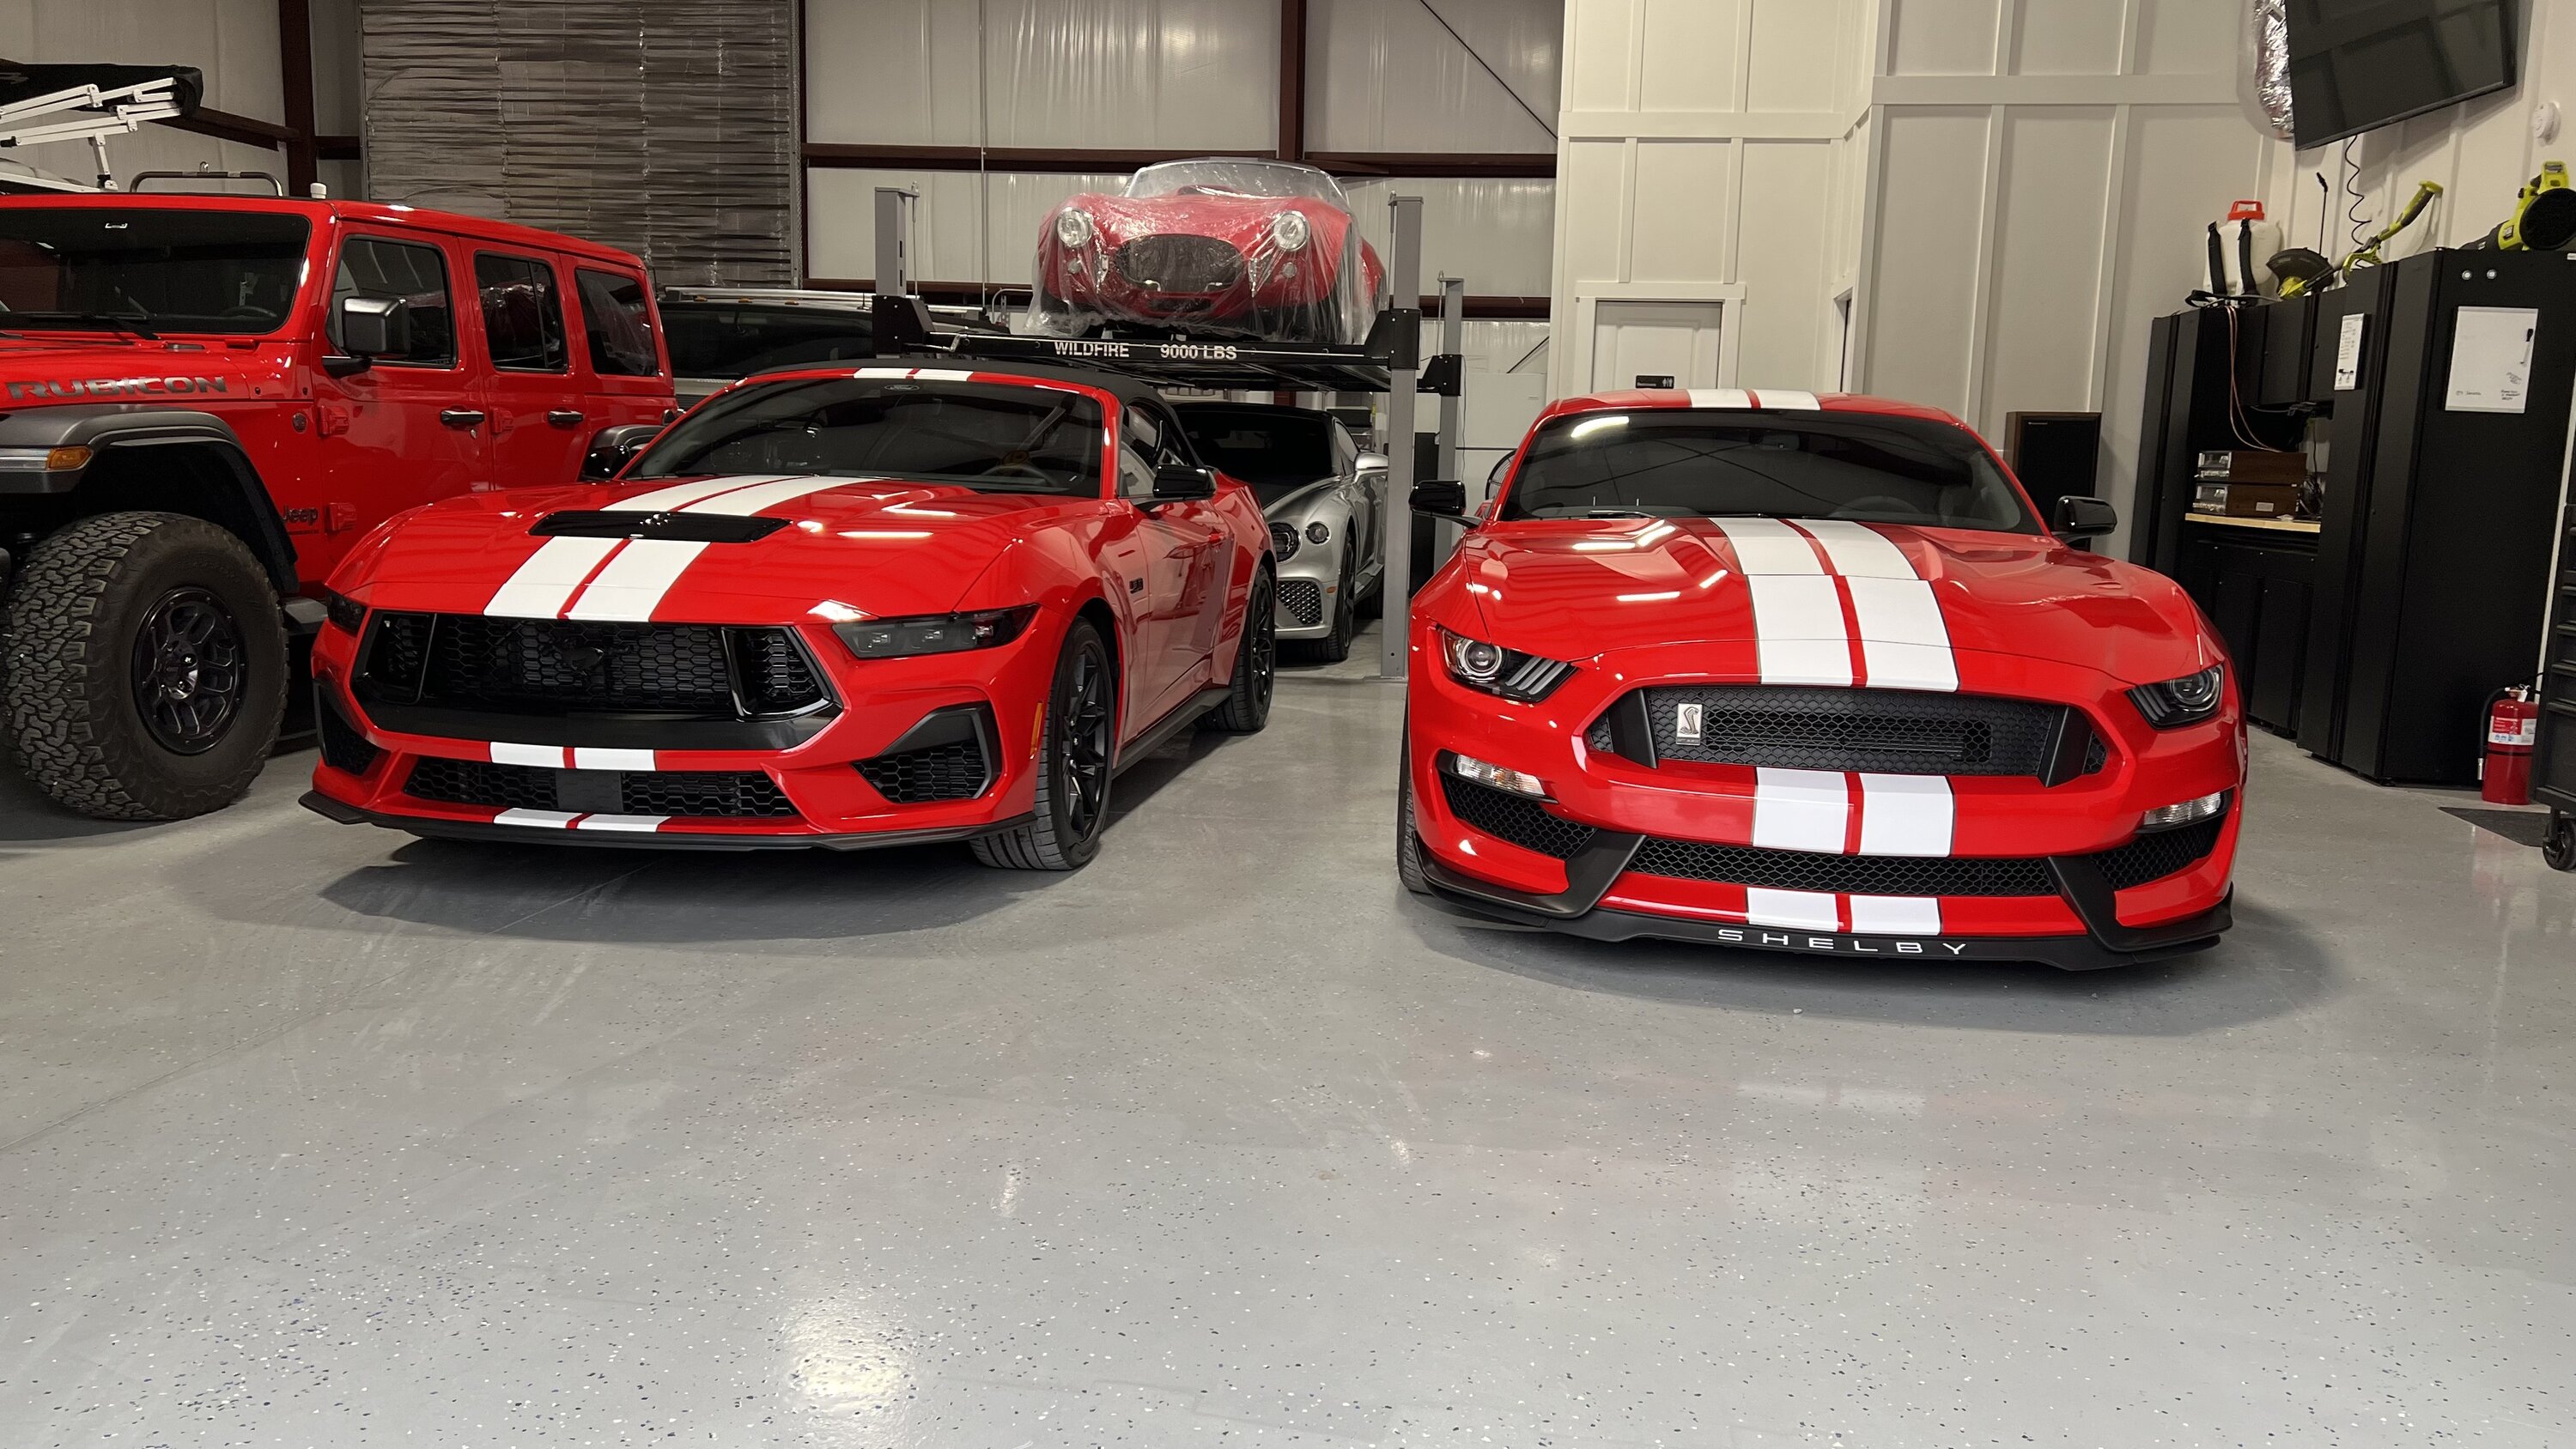 S650 Mustang S650 Red convertible with stripes next to GT350 IMG_9422